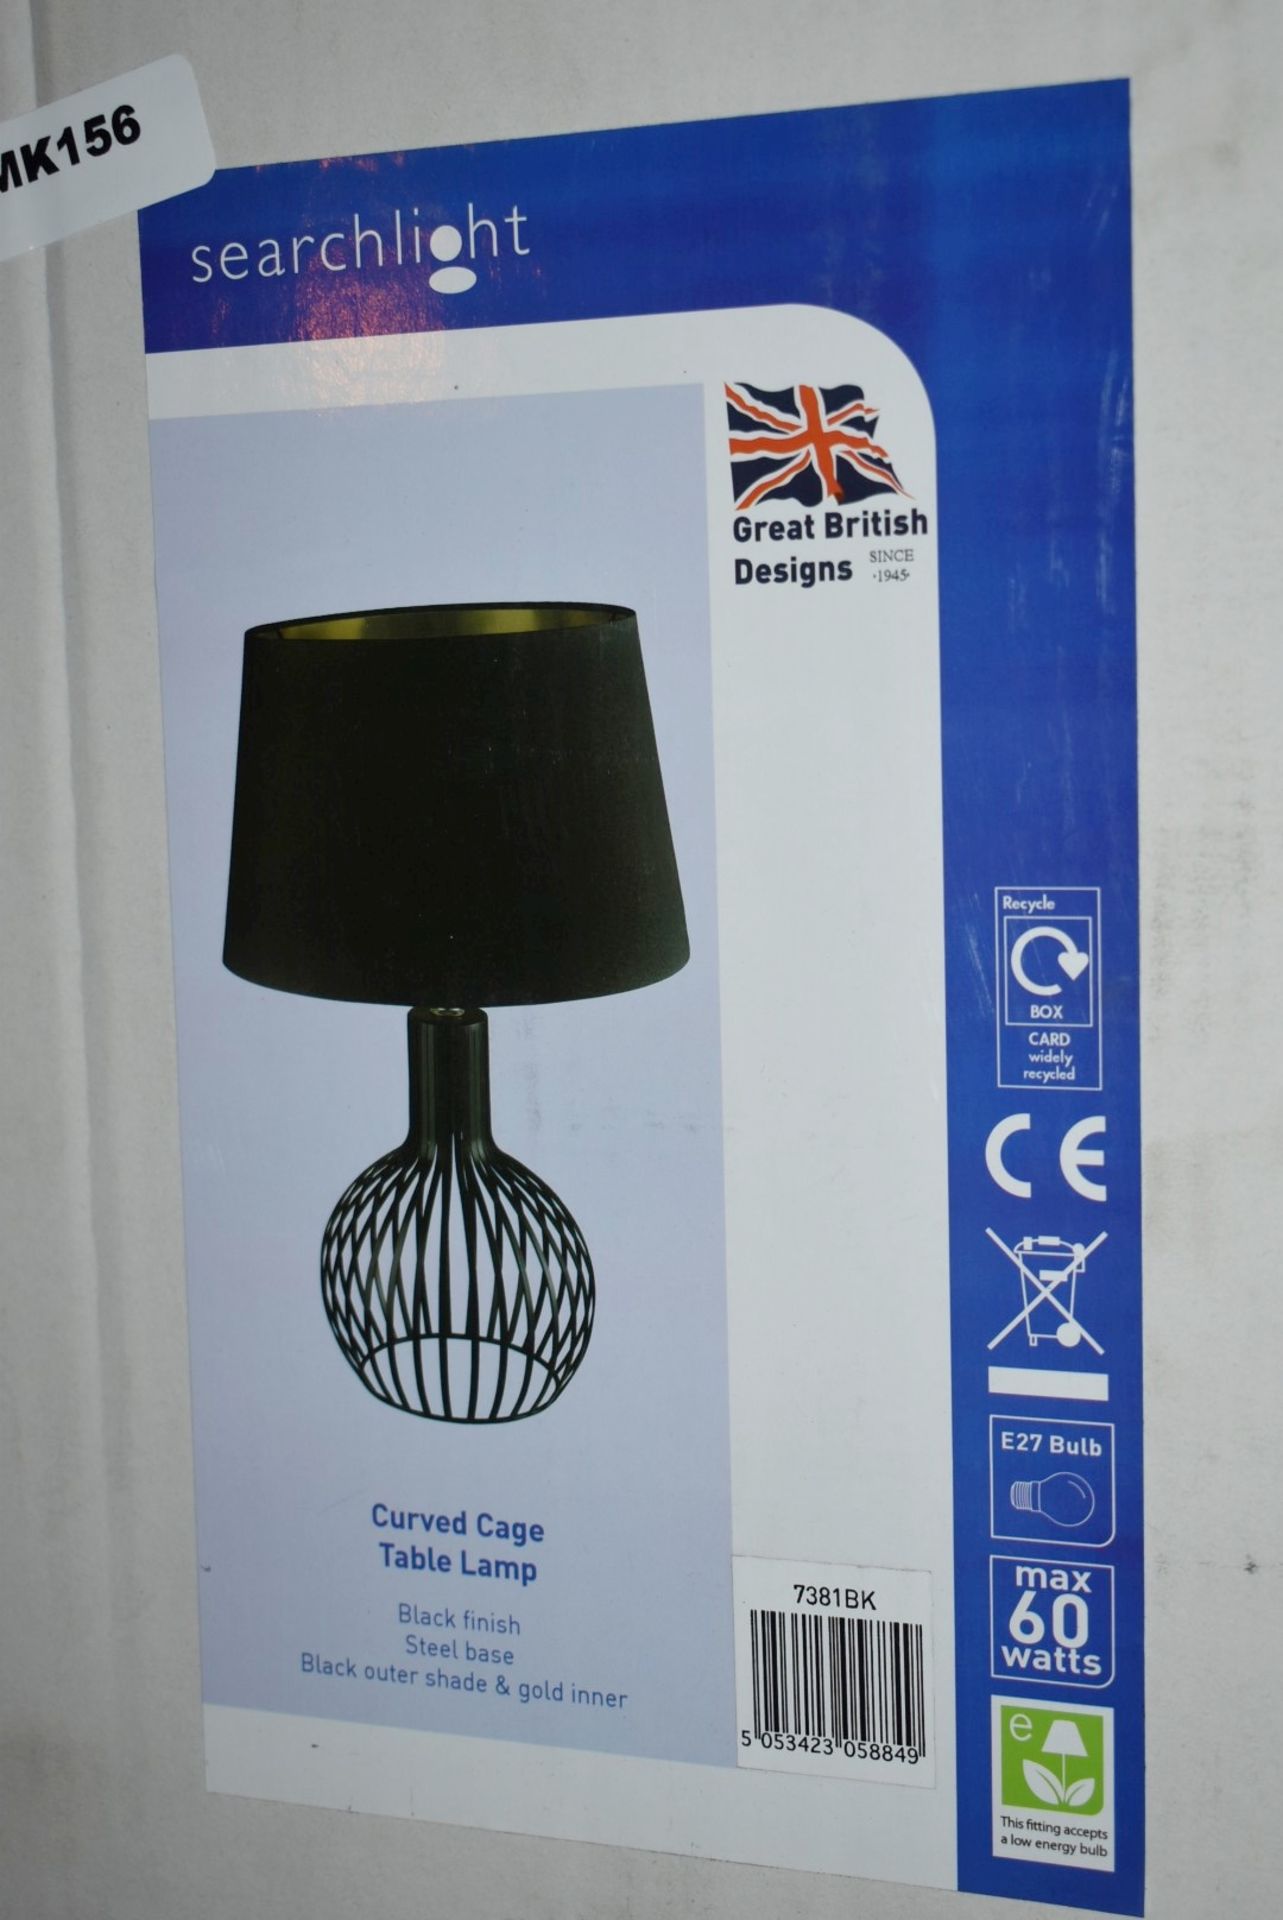 1 x Searchlight Curved Cage Table Lamp With Black Steel Base and Black Shade - Type 7381BK - Ref